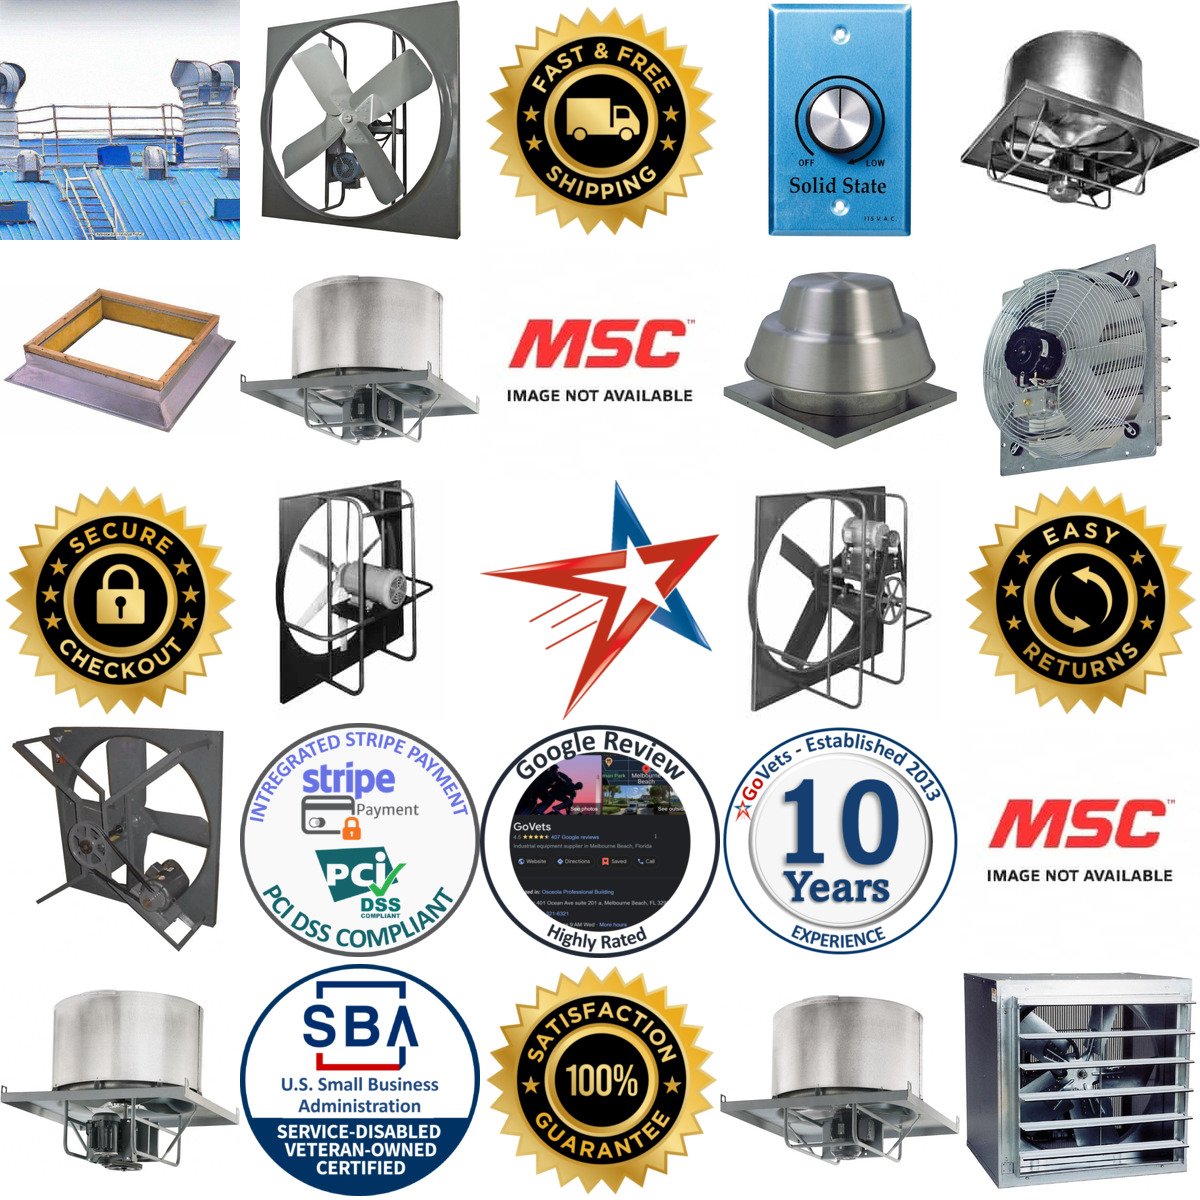 A selection of Exhaust and Ventilation products on GoVets